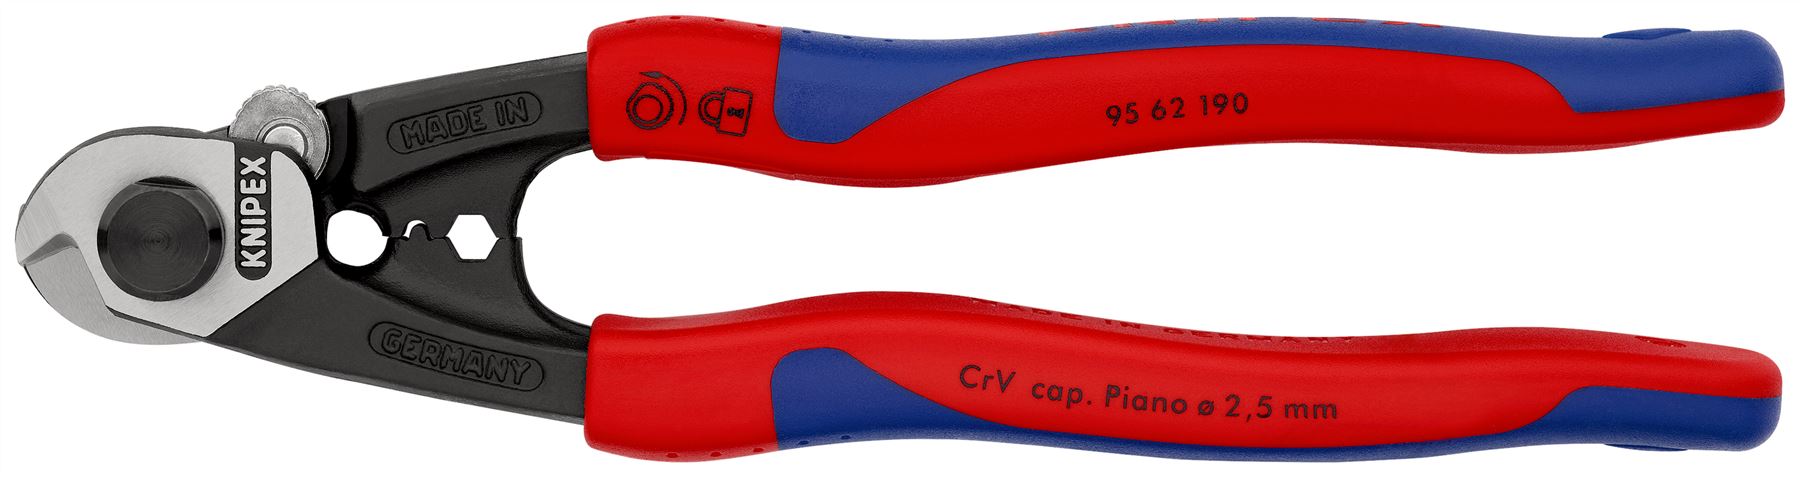 Knipex Wire Rope Cutters Forged Cutting Pliers Burnished Head up to 7mm Capacity 190mm 95 62 190